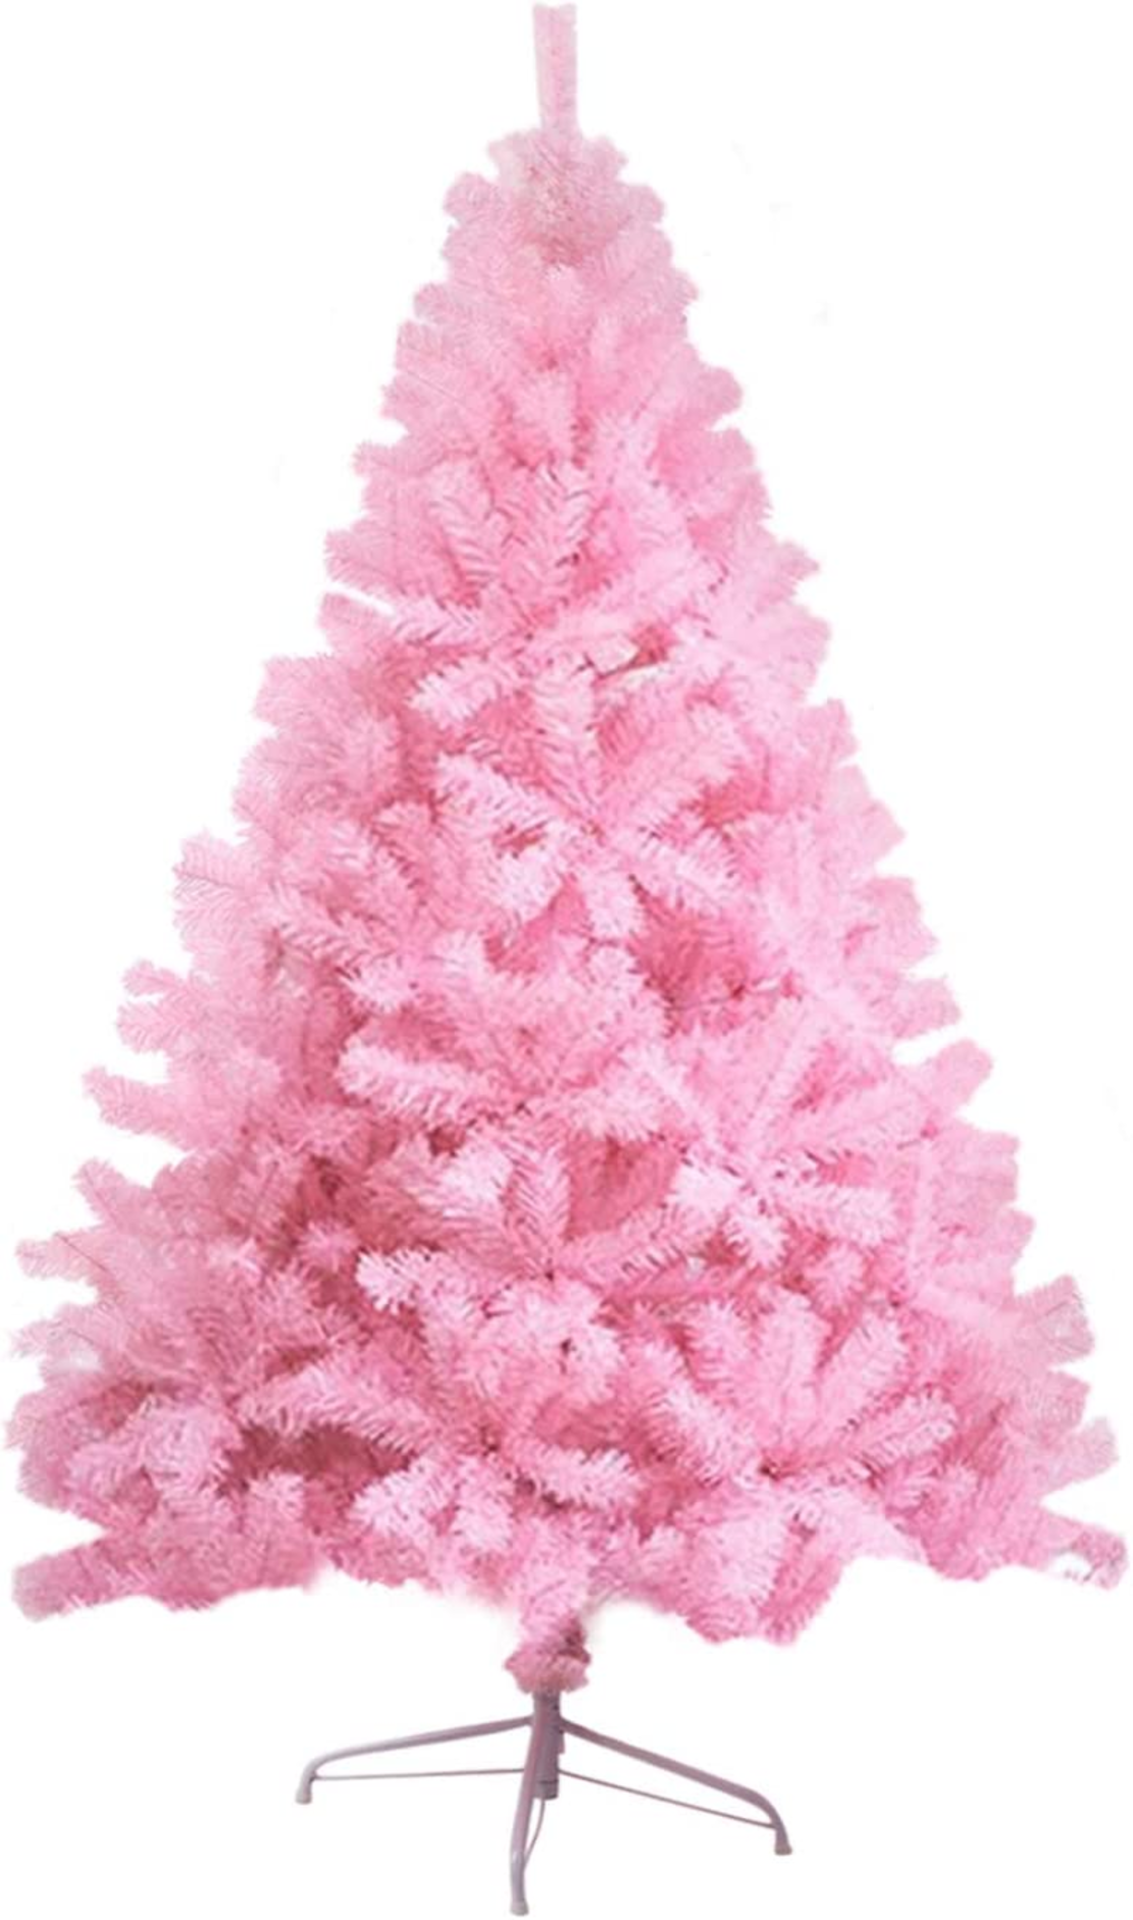 TRADE LOT 10 x Brand New Luxury 6ft Pink 700 Tip Christmas Trees